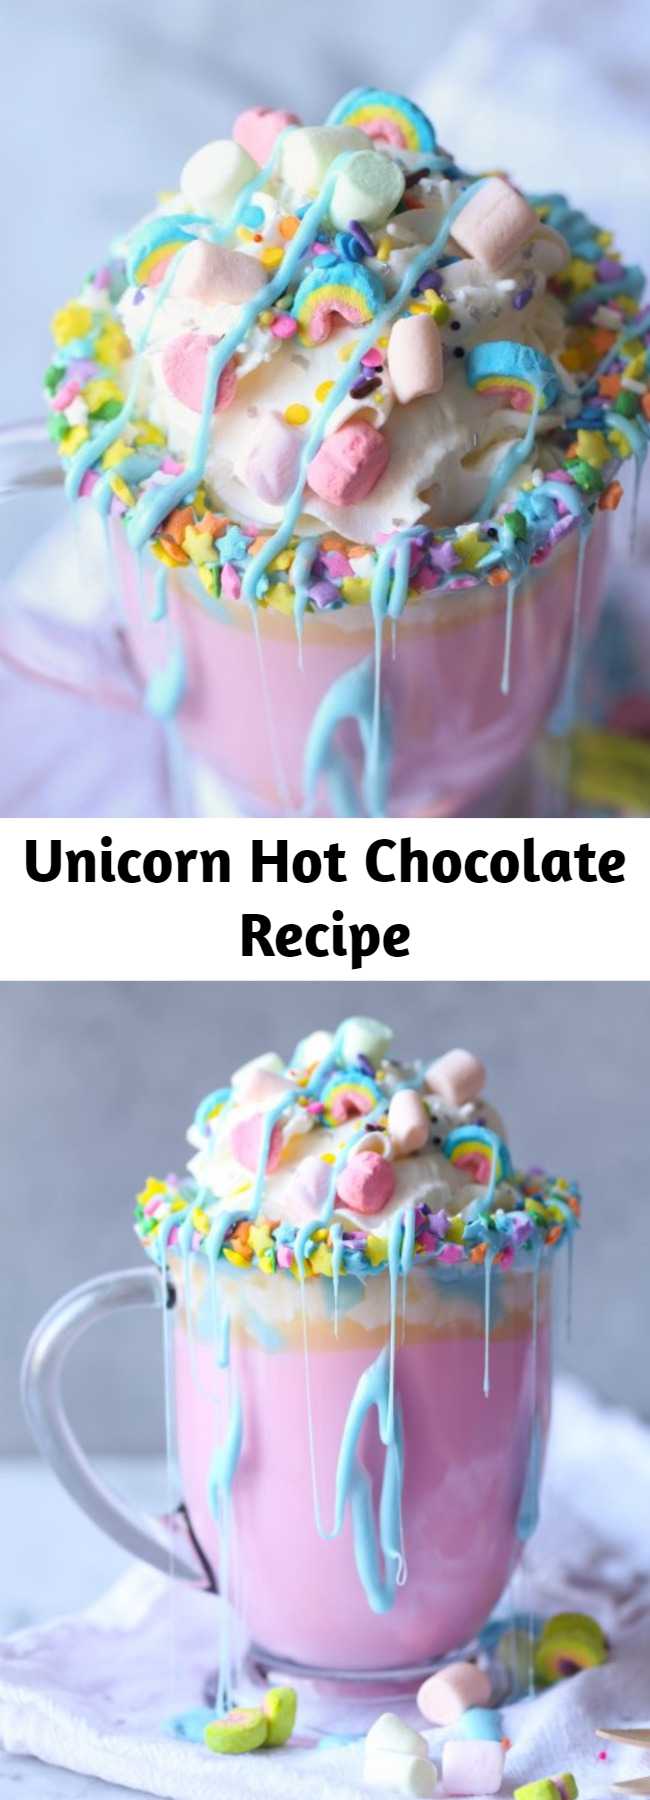 Unicorn Hot Chocolate Recipe - A magical pastel rainbow of color, fluffy mini marshmallows and a warm and creamy white chocolate make this Unicorn Hot Chocolate the stuff of little girls' dreams.